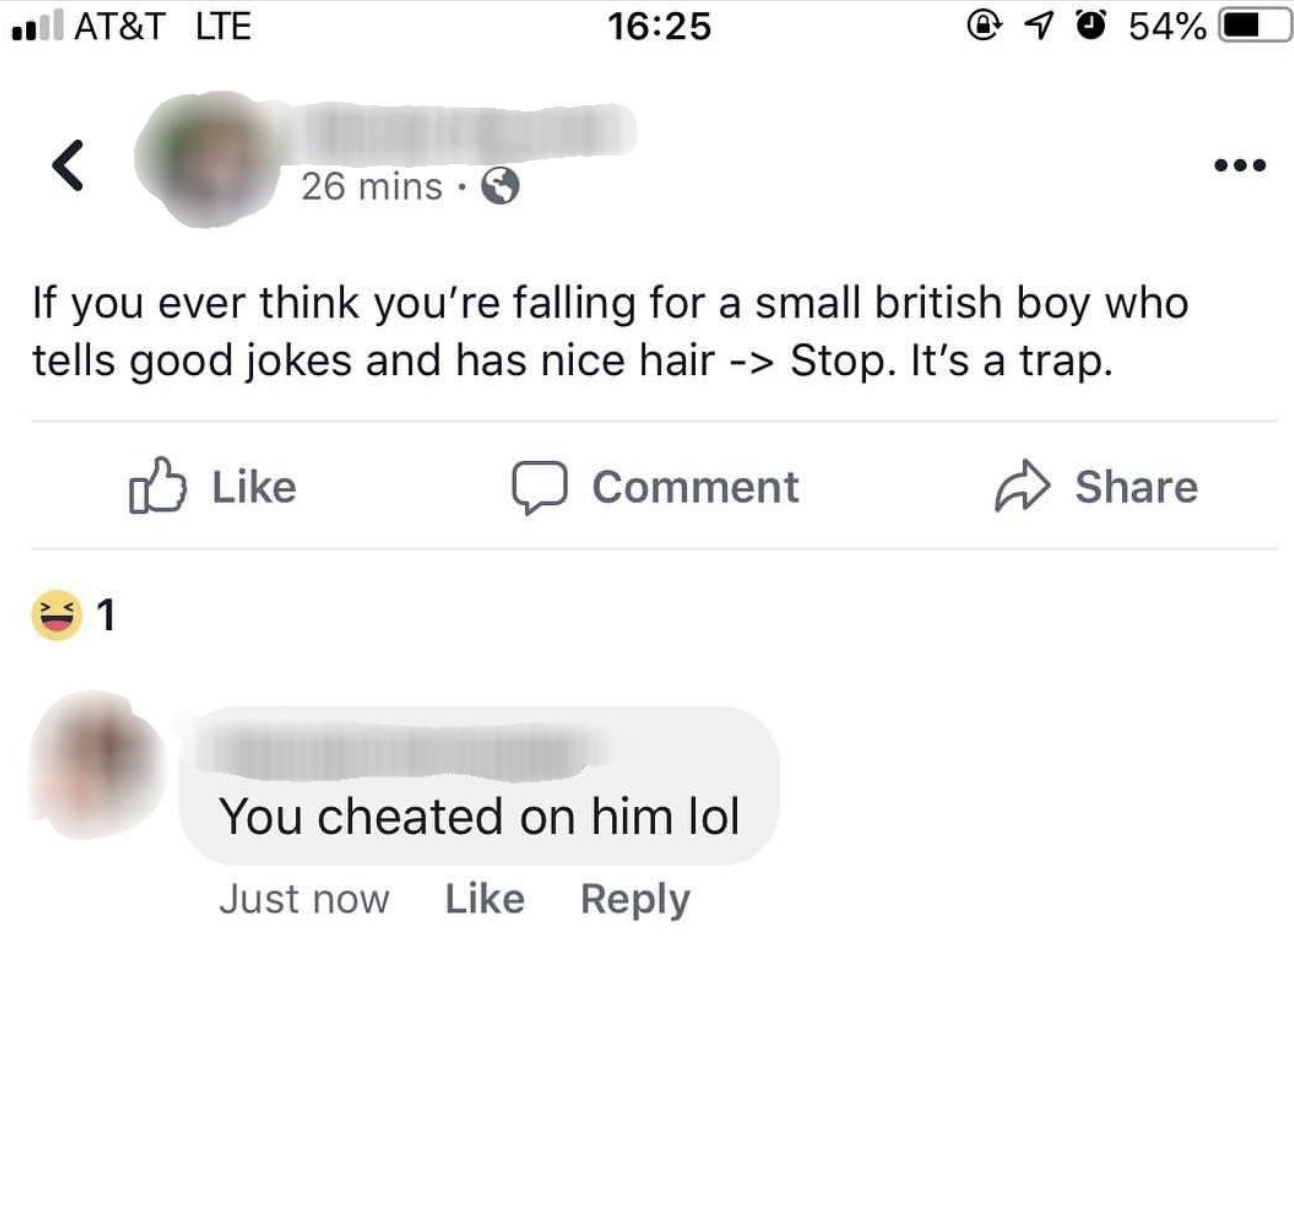 Comment telling the person they cheated on their boyfriend